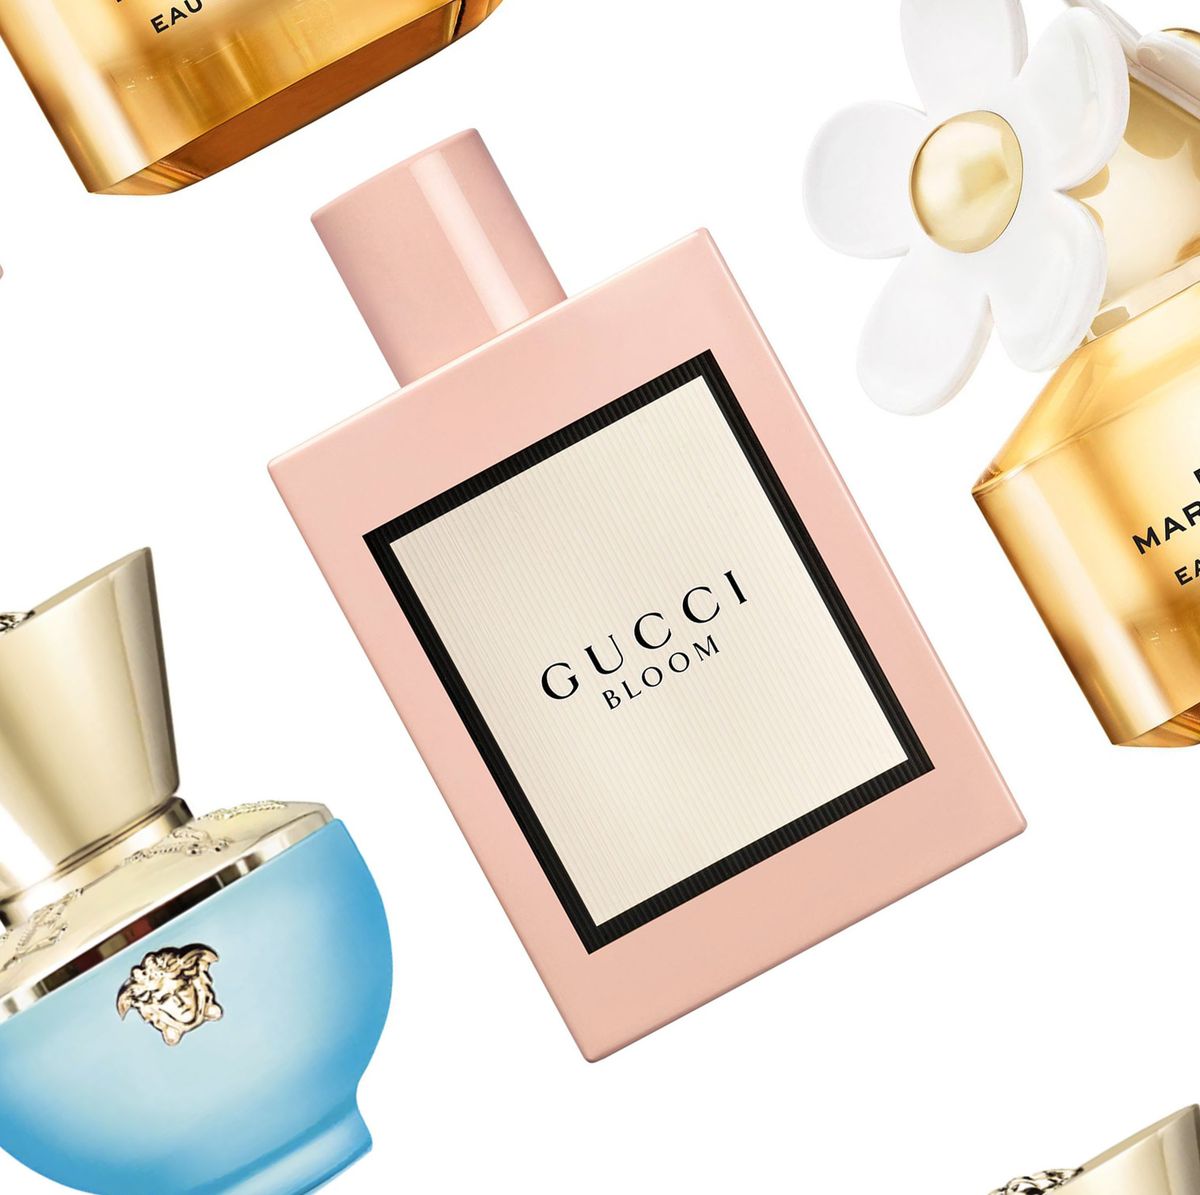 The 10 Best Floral Perfumes for Spring and Summer 2022